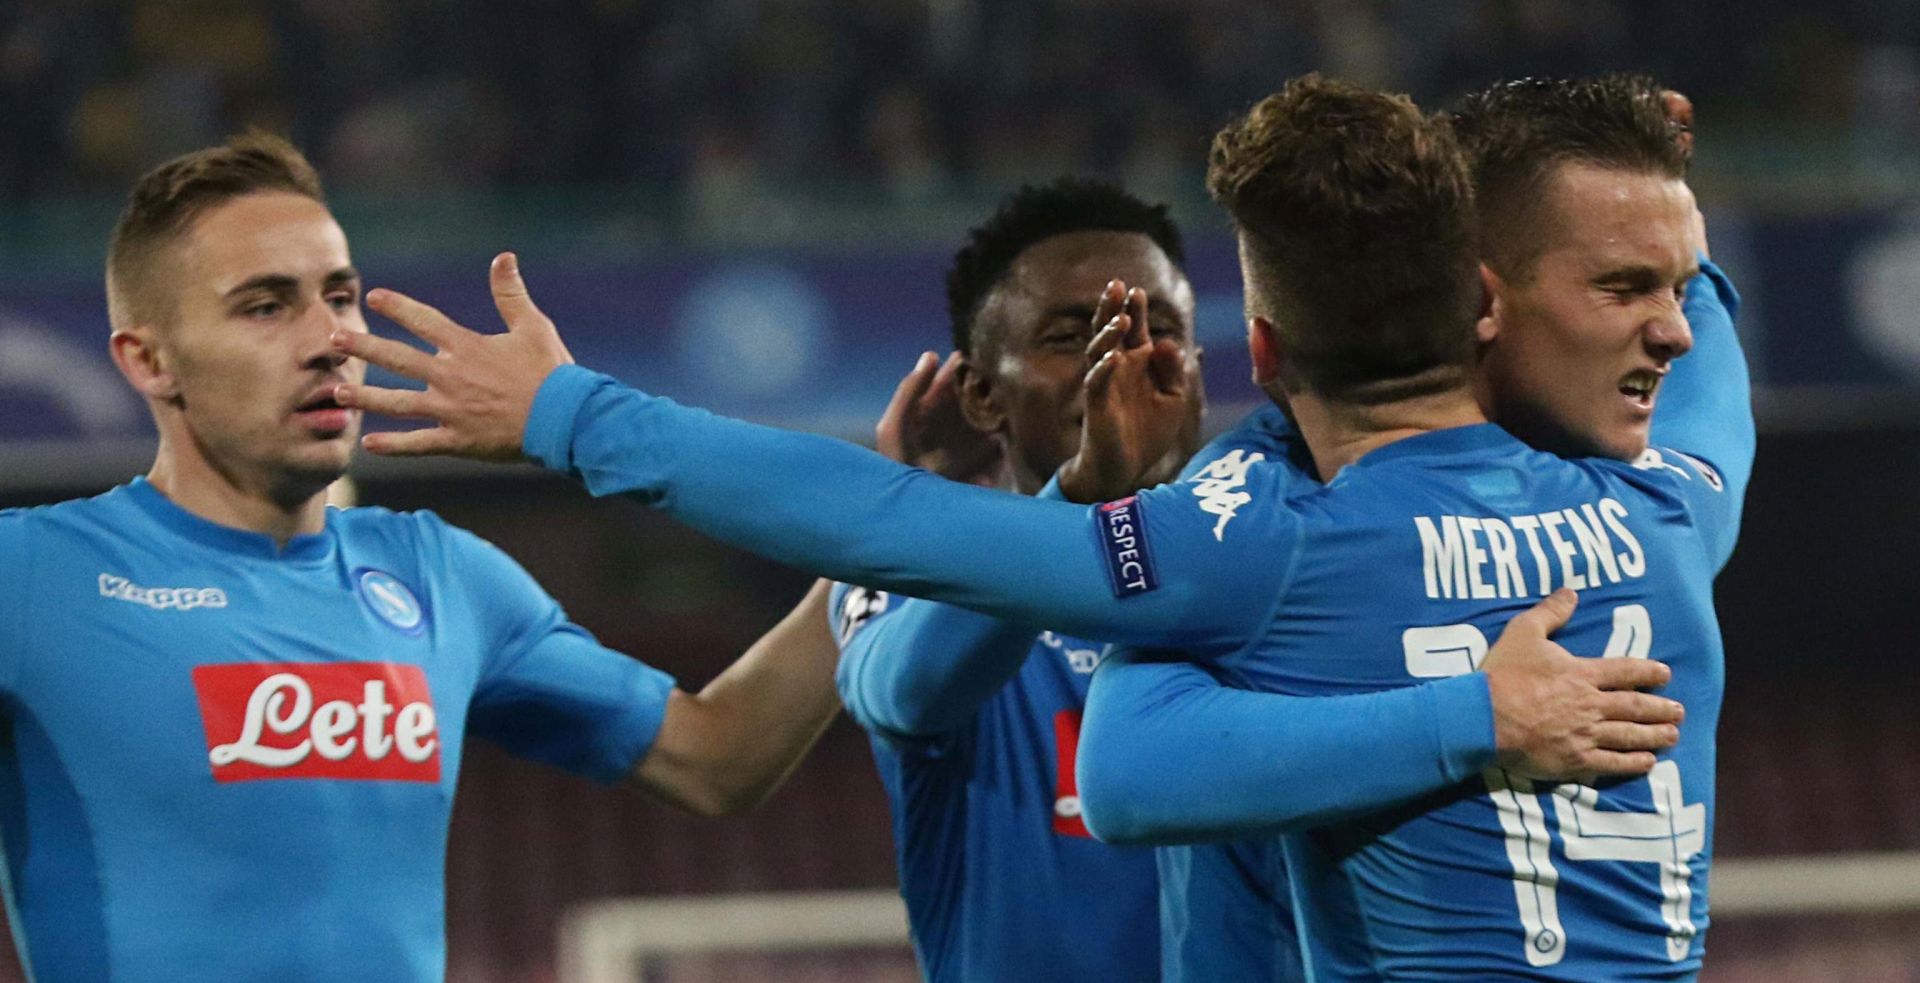 epa06343029 Napoli's Piotr Zielinski (R) celebrates with teammates after scoring a goal during the UEFA Champions League Group F soccer match between SSC Napoli and Shakhtar Donetsk at the San Paolo stadium in Naples, Italy, 21 November 2017.  EPA/CESARE ABBATE